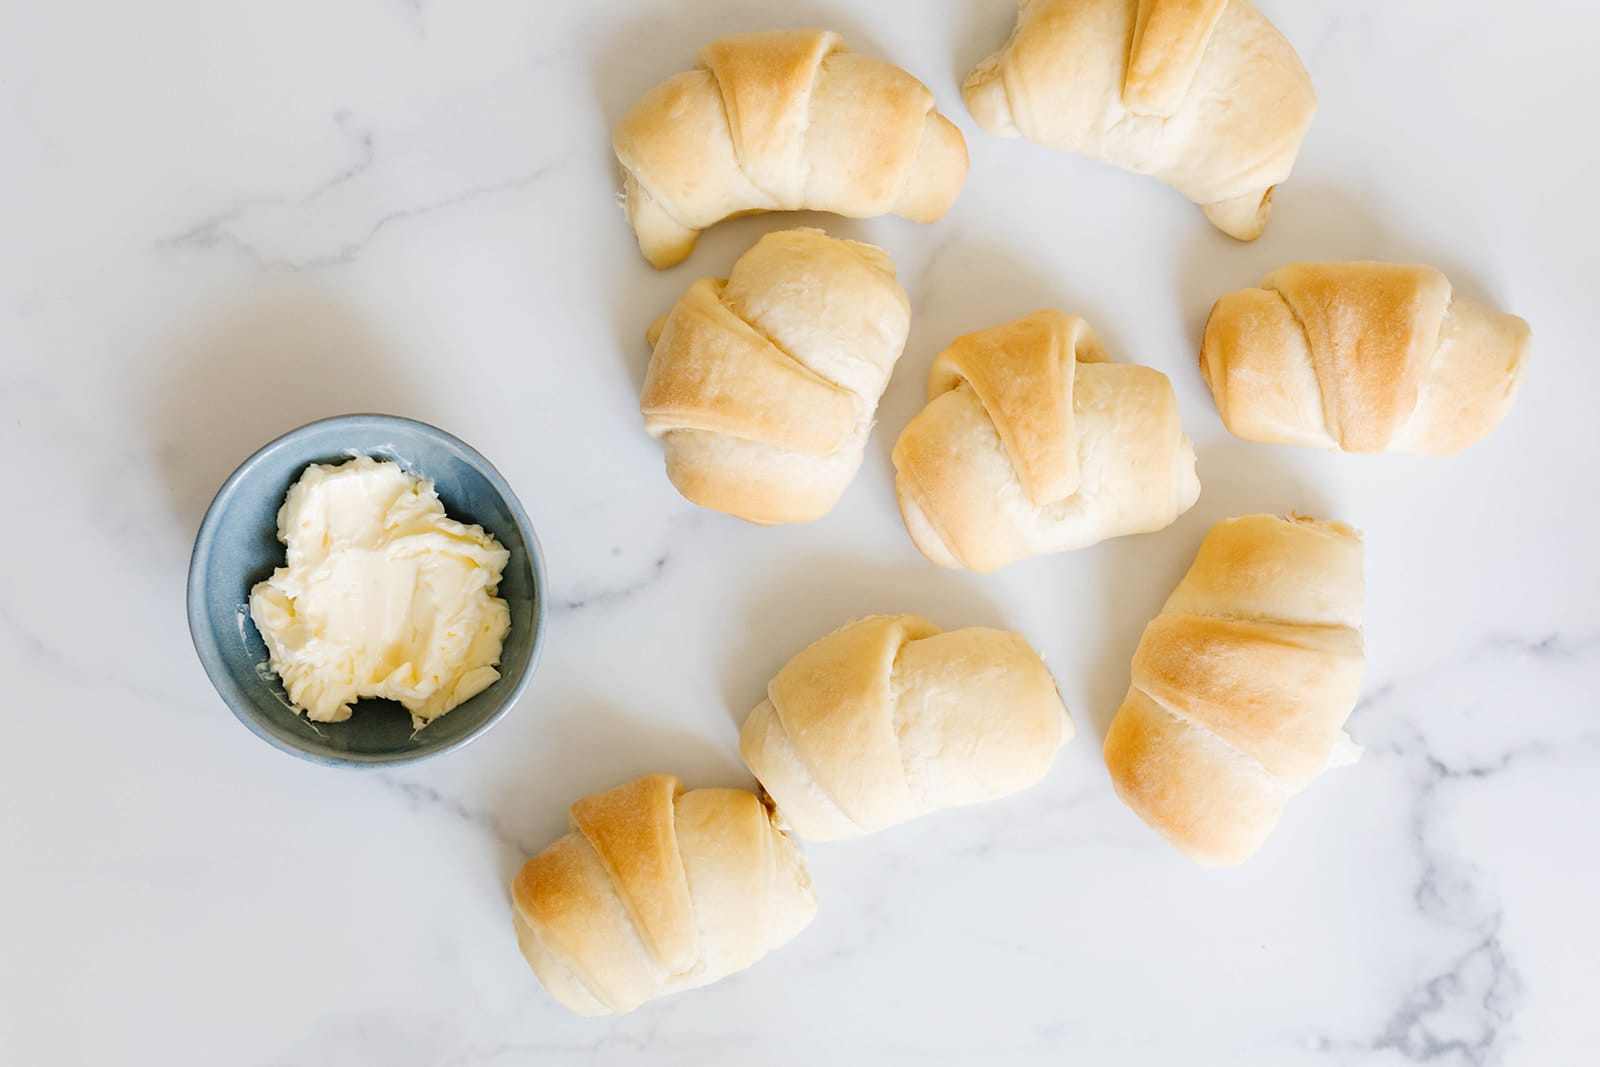 5 Easy Crescent Roll Recipes You Can Make In Just Minutes!